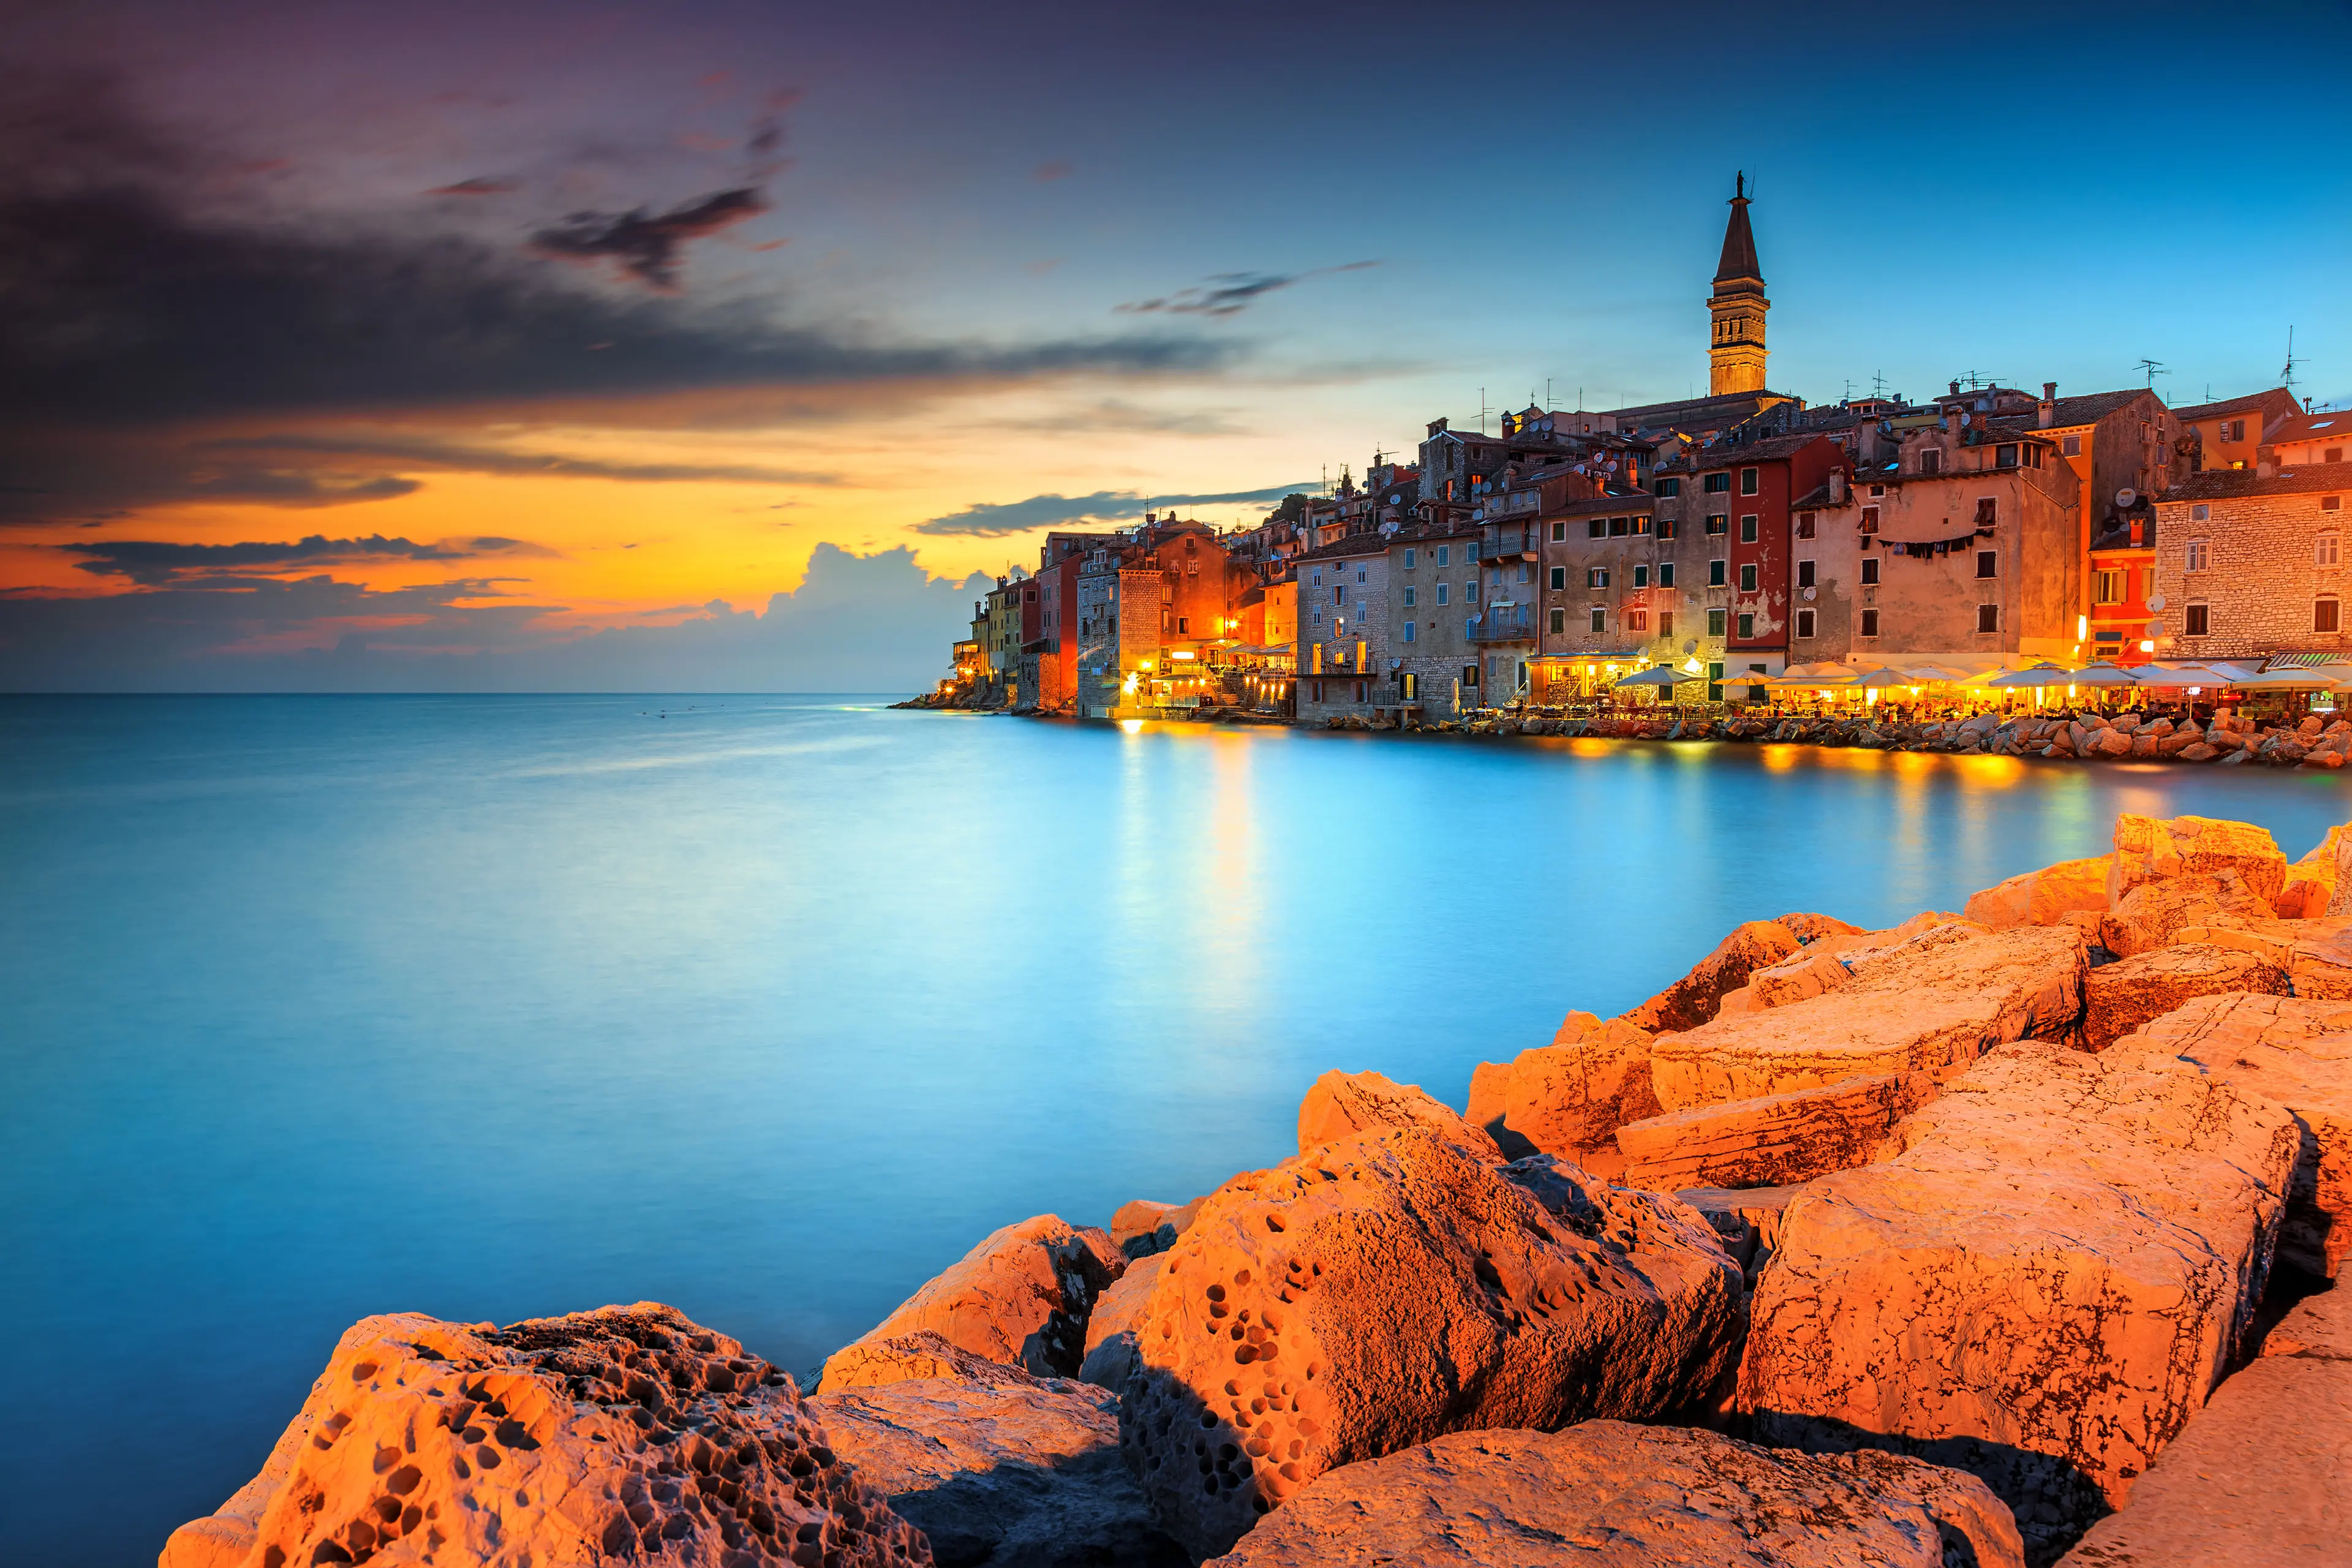 2-Day Family Adventure and Relaxation in Hidden Rovinj, Croatia